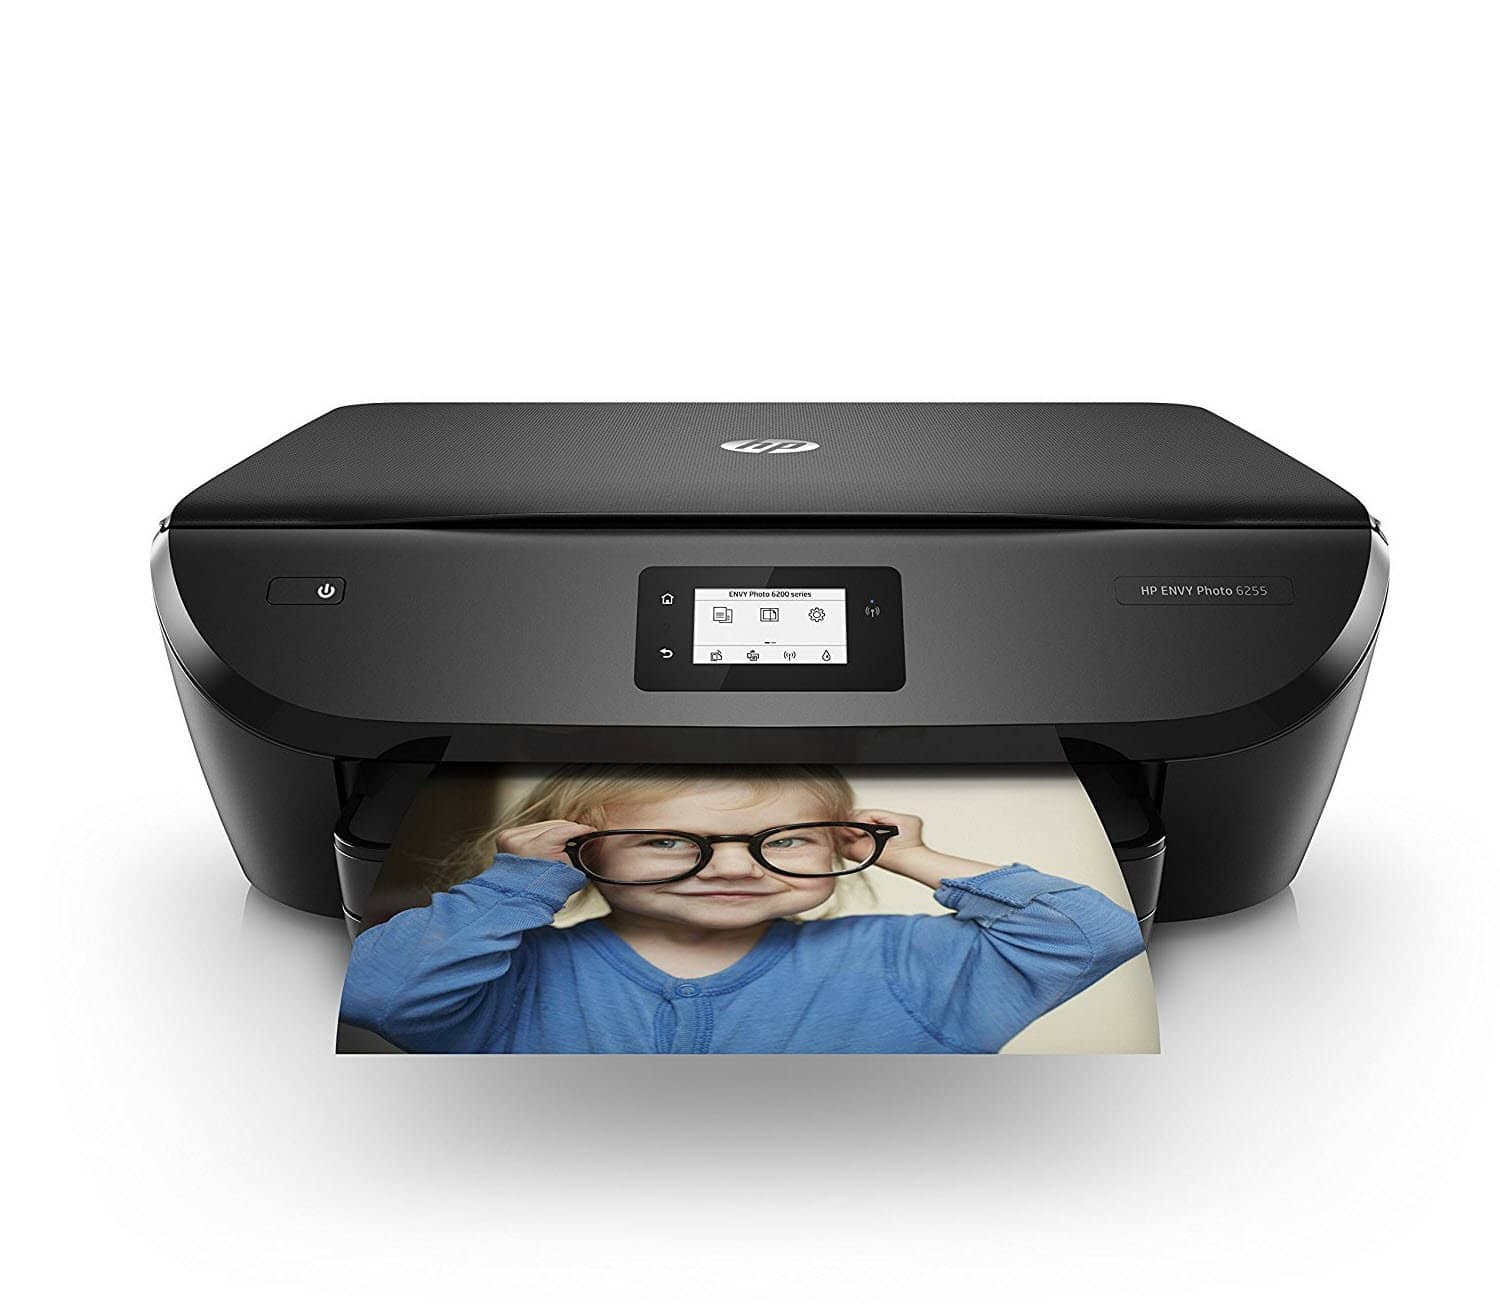 HP ENVY Photo 6255 All in One Photo Printer : Printer and 100 page Instant Ink card